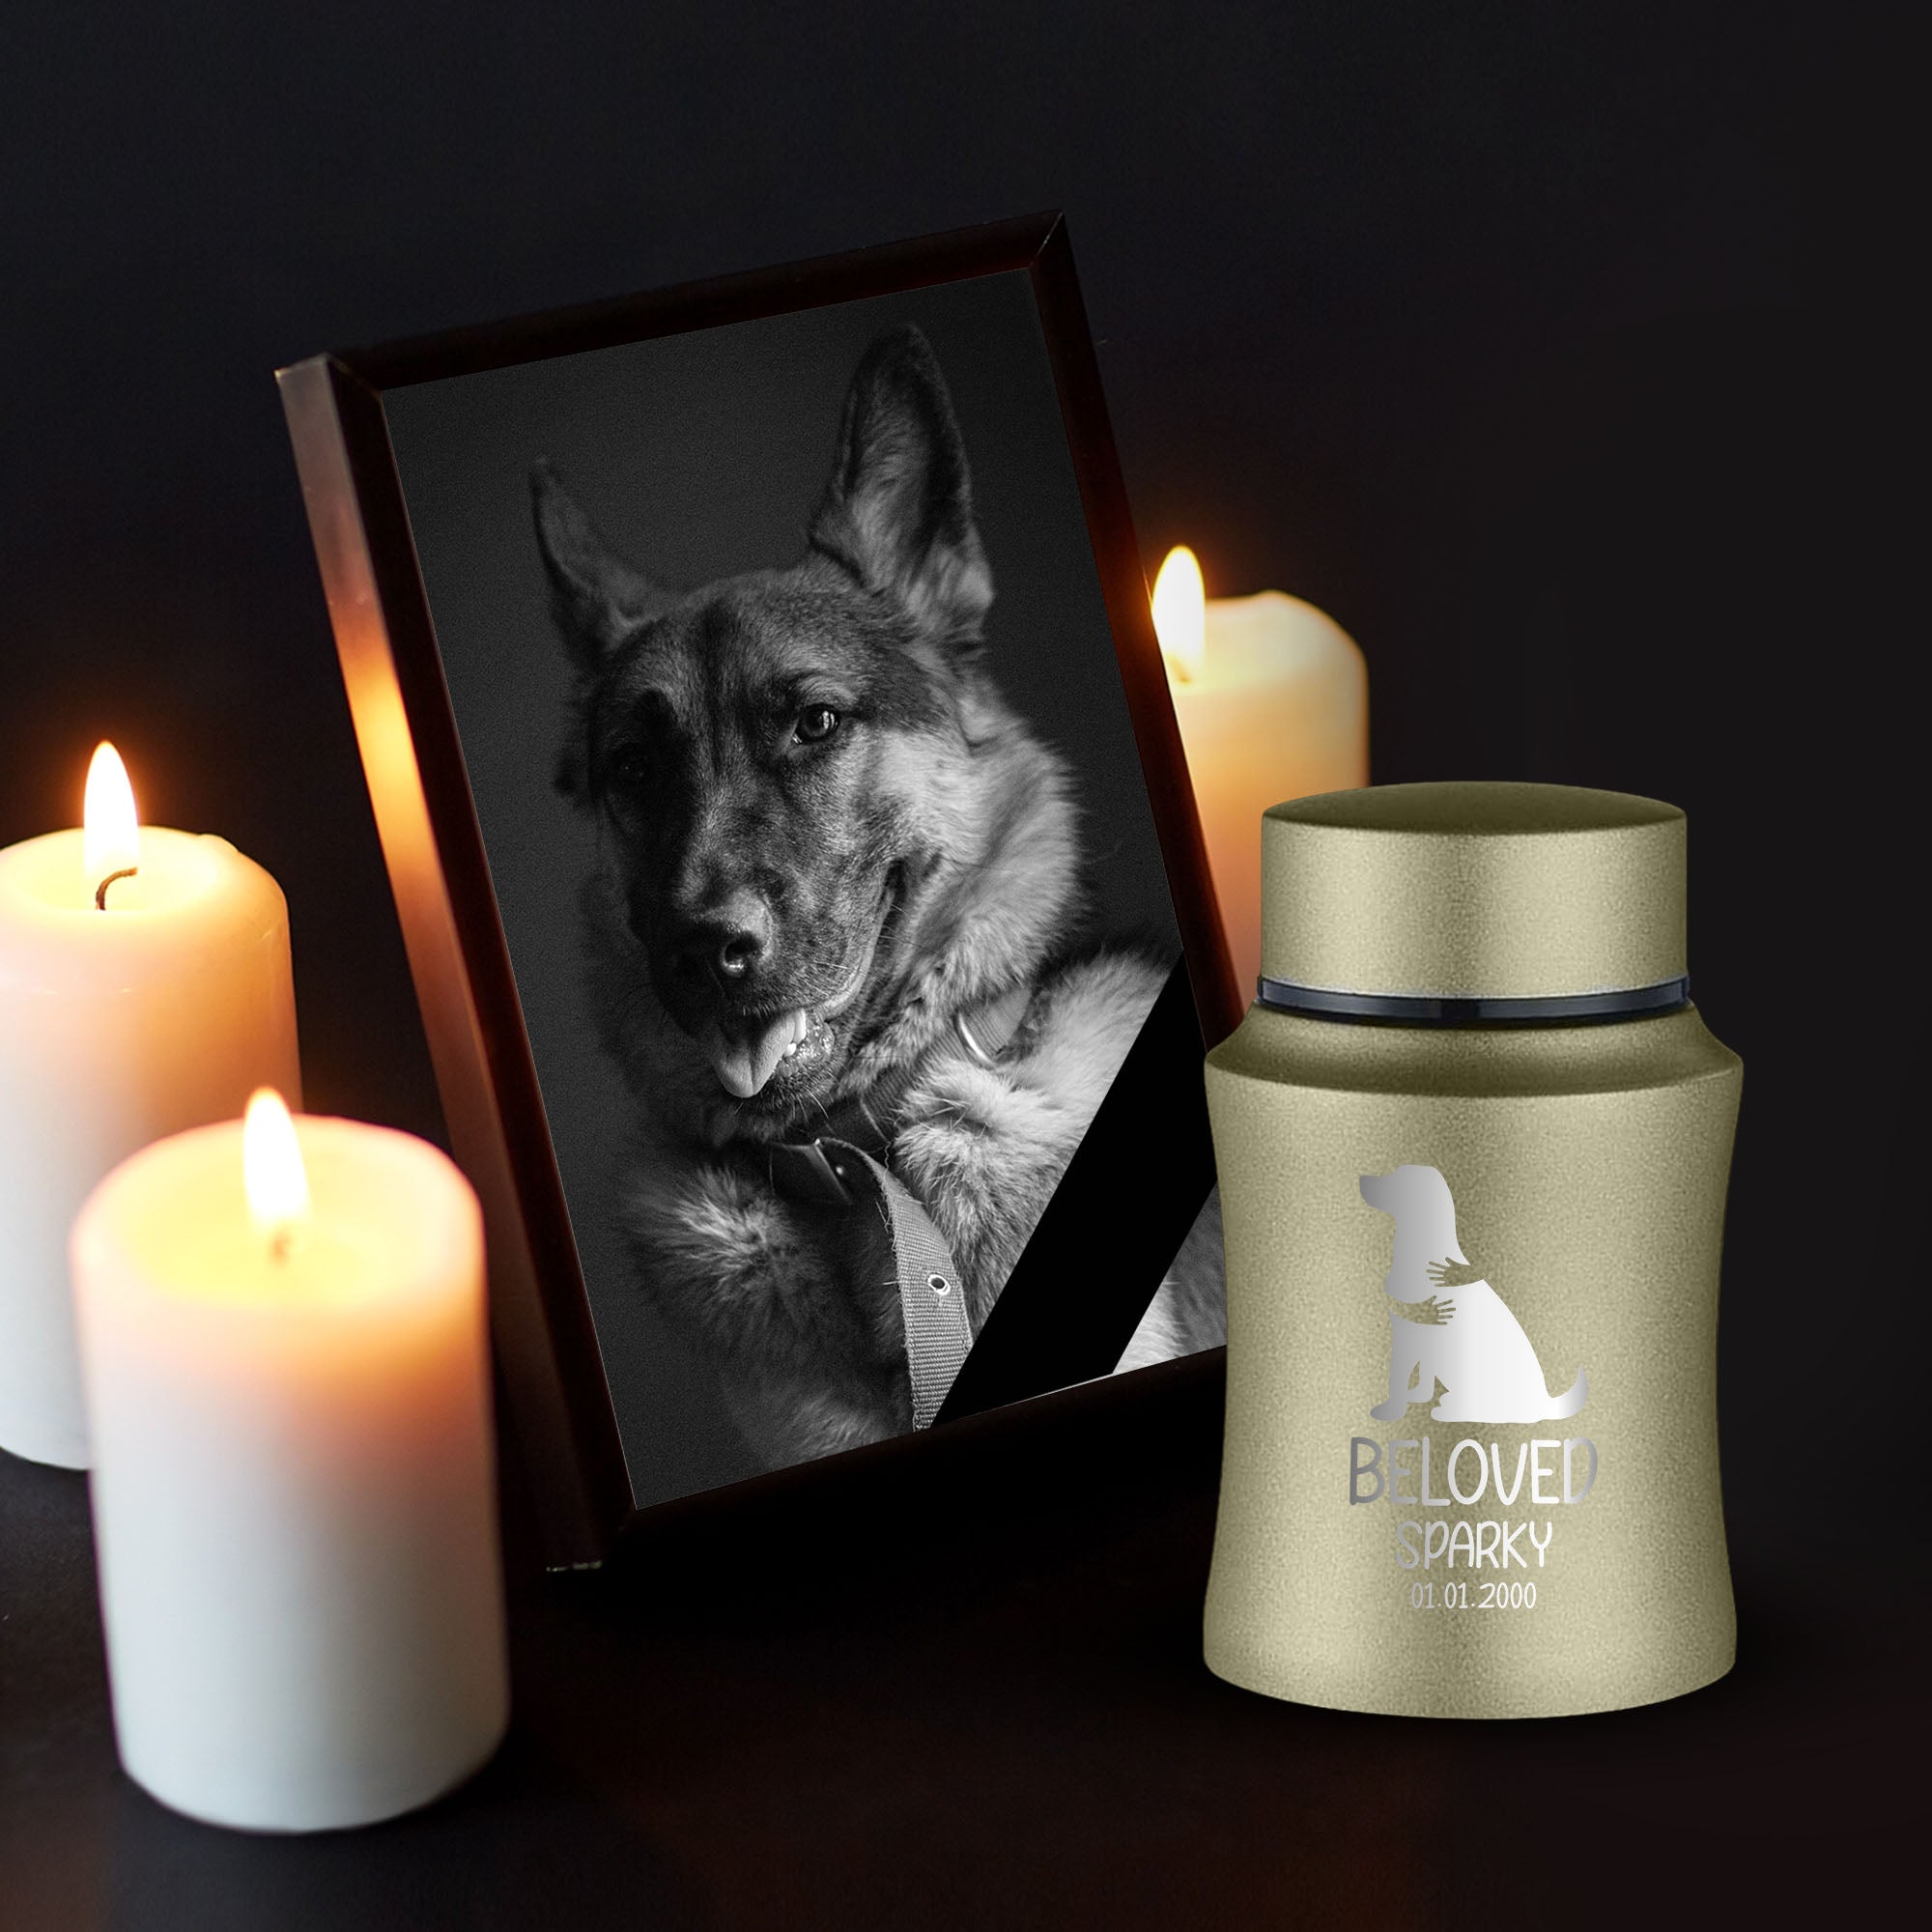 Customized Small Keepsake Urn Personalized Engraved with Pet Name, Date, and Text - 4" Powder Coated Cremation Mini Compact Urn for Dogs Ashes | 5–10 Lbs Capacity.